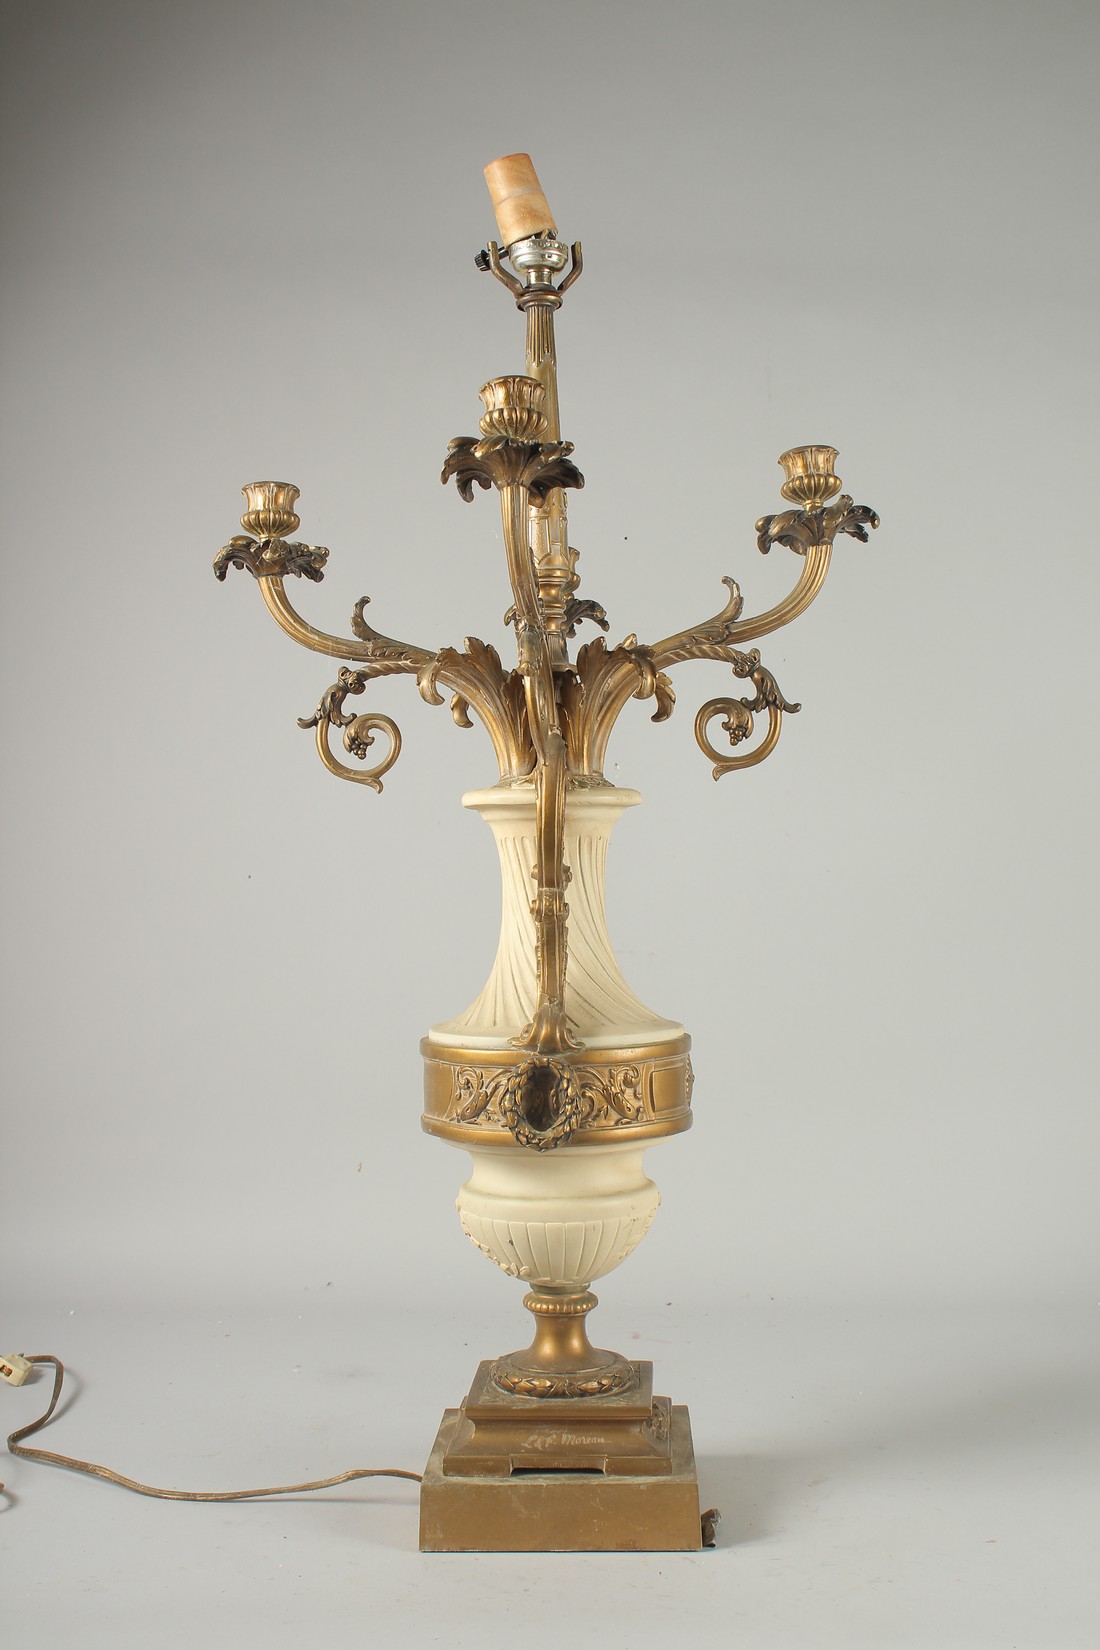 A 19TH CENTURY FRENCH WHITE MARBLE AND FOUR BRANCH ORMOLU LAMP on a square base. 29ins high. - Image 2 of 5